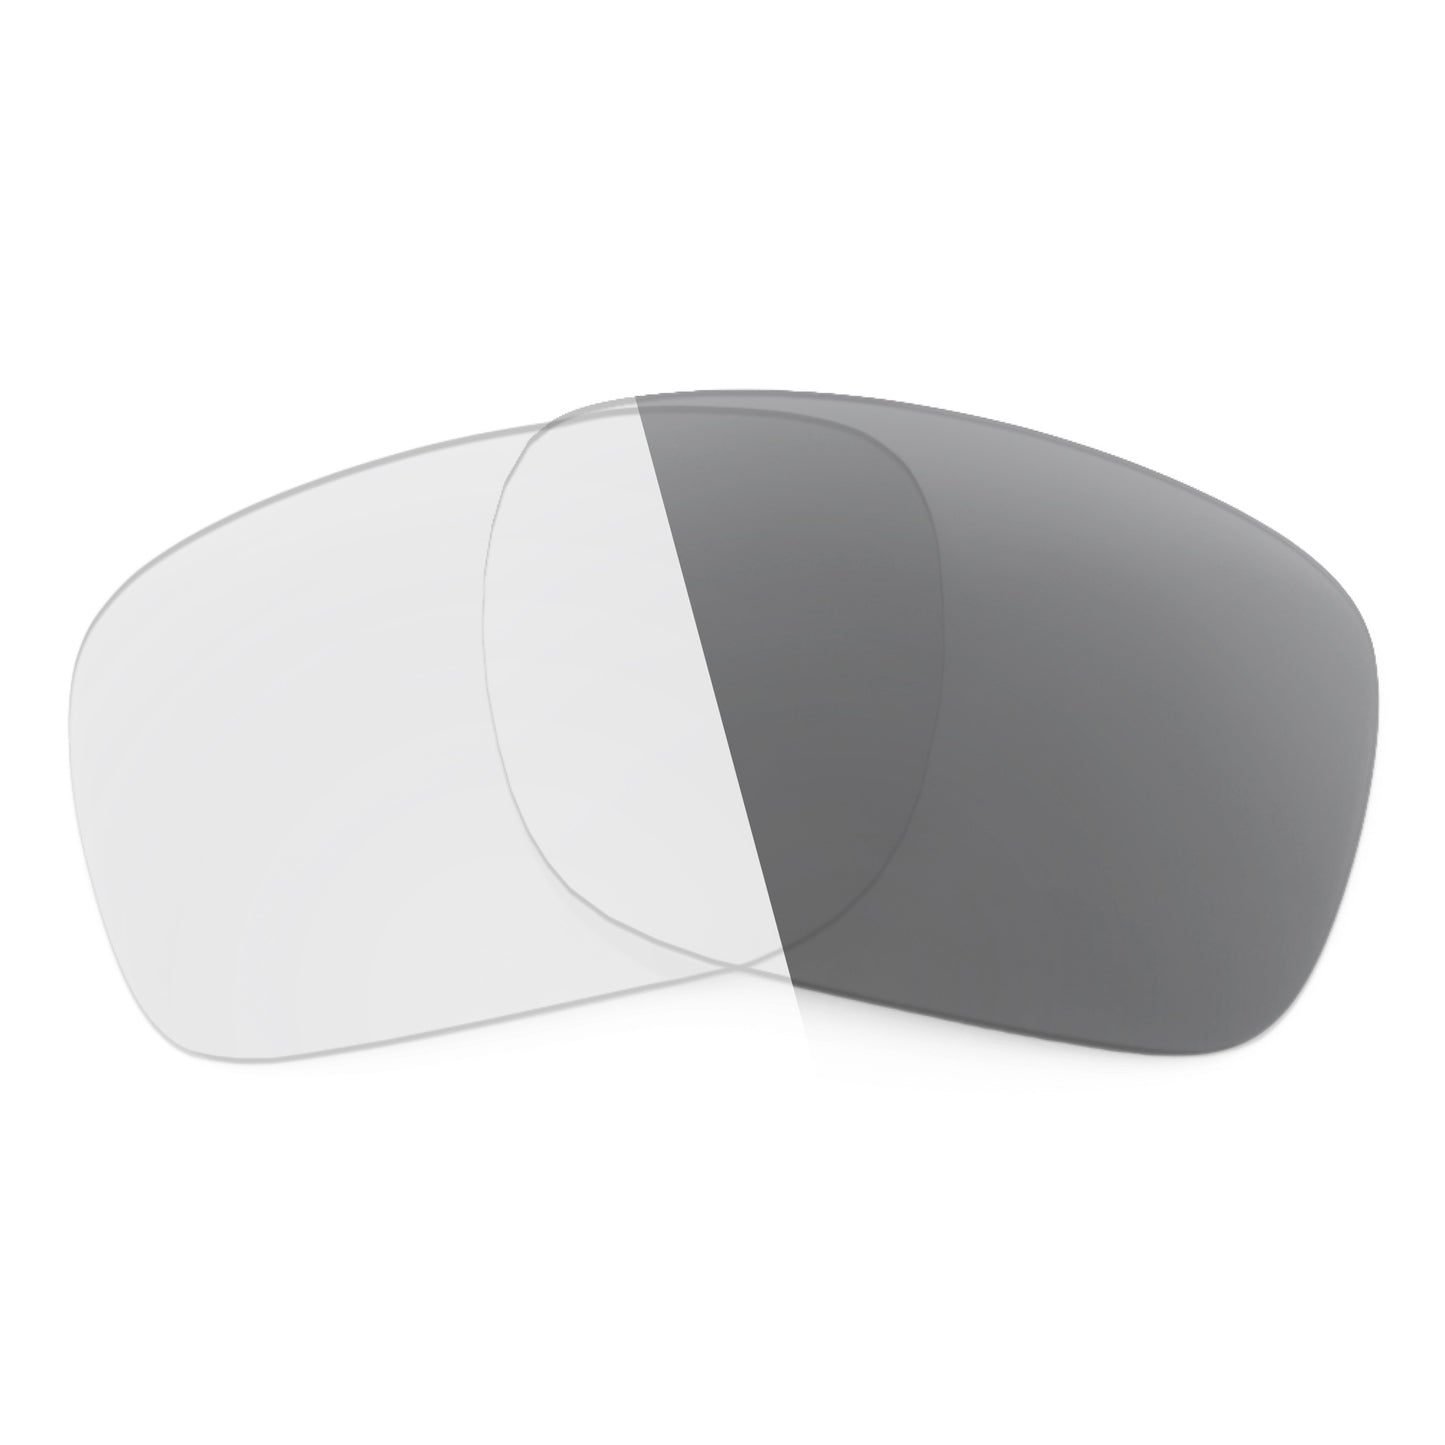 Revant replacement lenses for Ray-Ban RB3387 64mm Non-Polarized Adapt Gray Photochromic